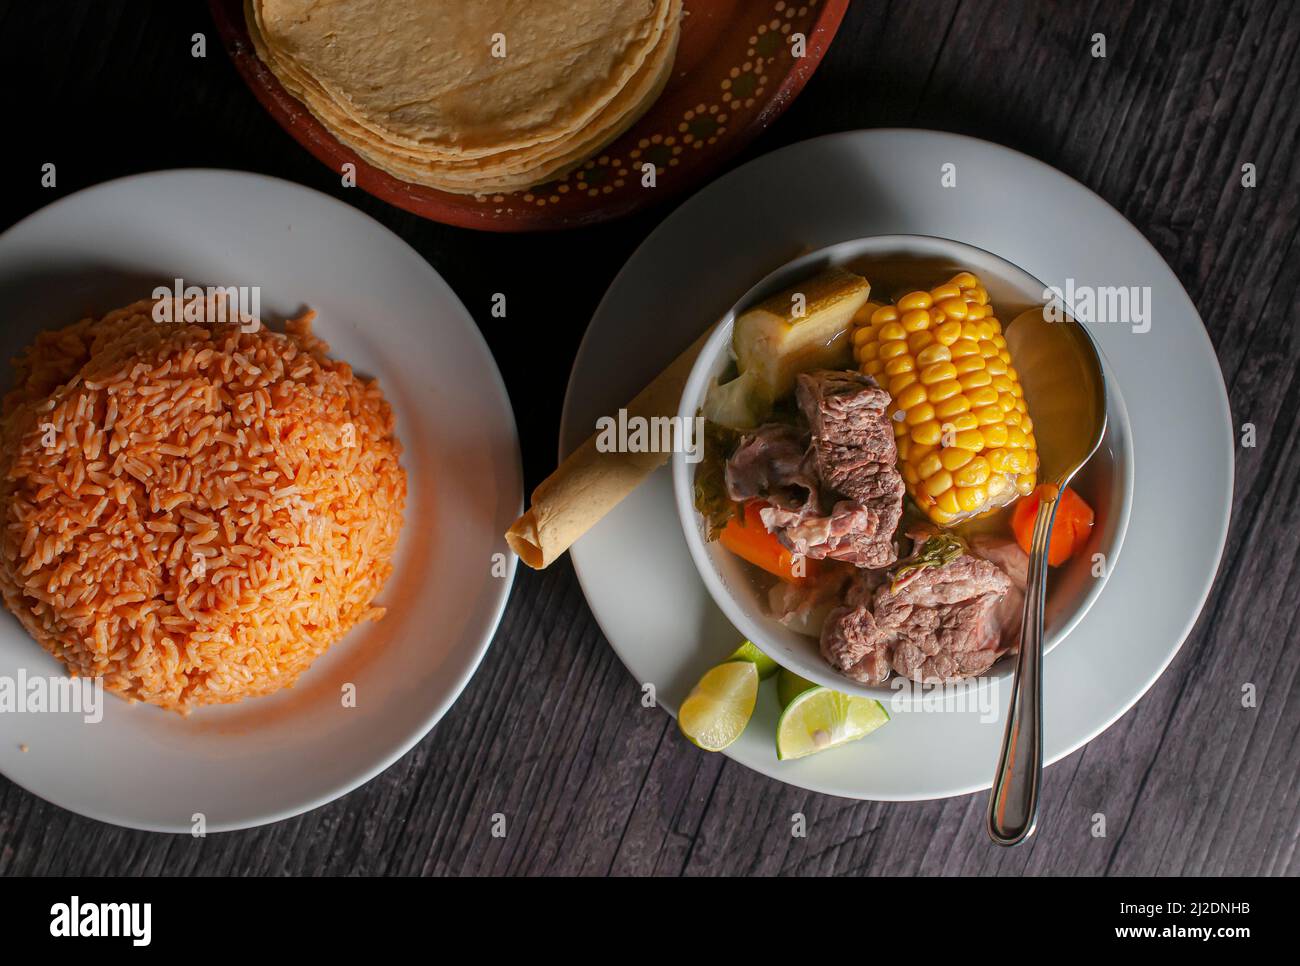 Mexican food, beef rib broth with vegetables on a white plate with slices of lemon and Mexican rice with tortillas on an old wooden table. Stock Photo